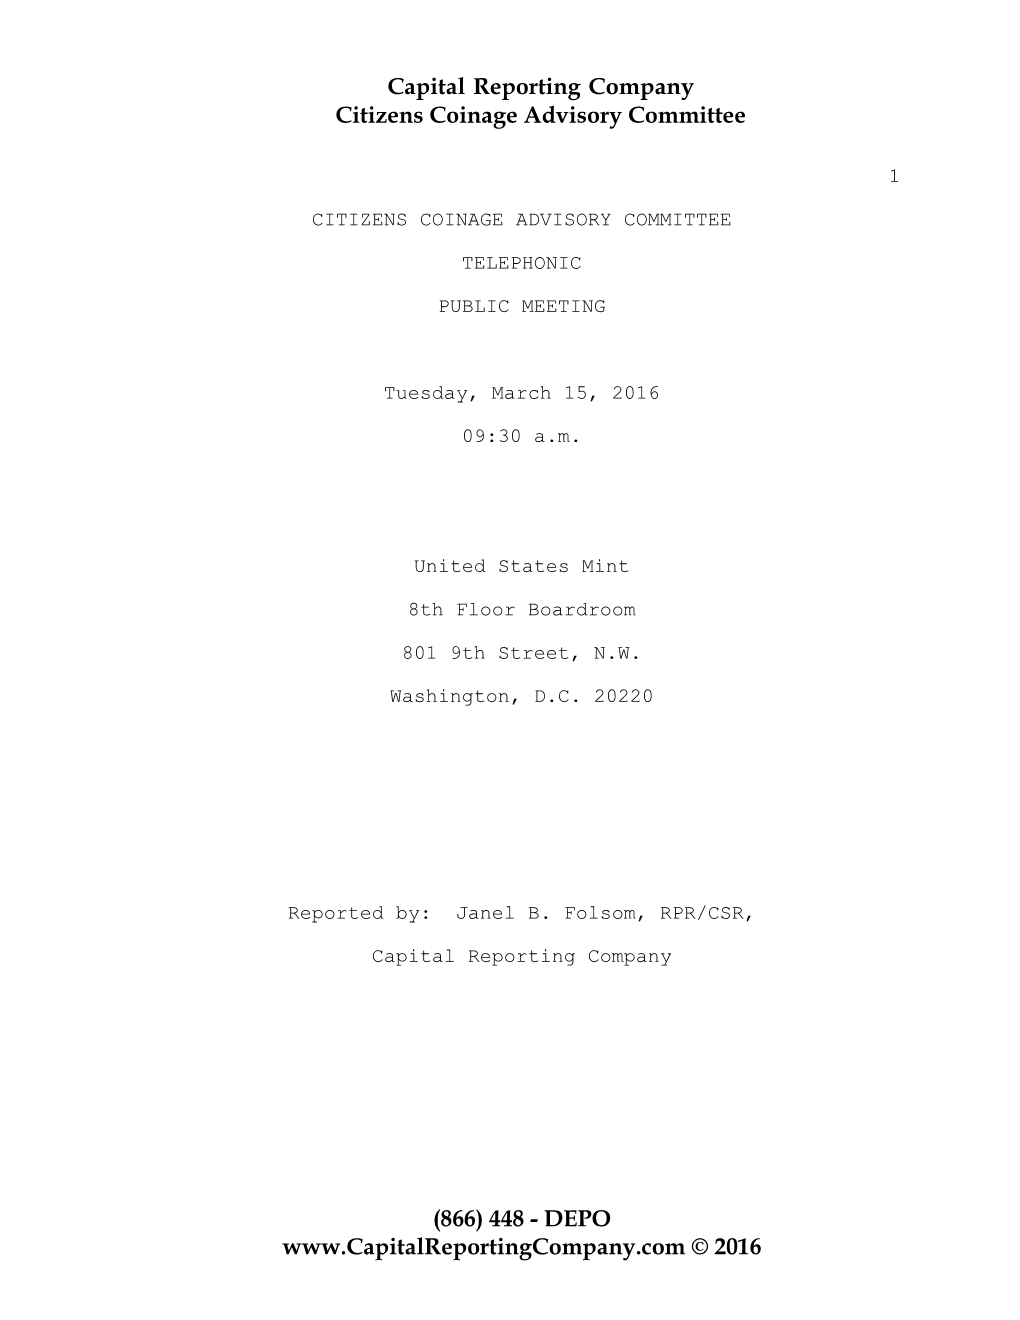 Capital Reporting Company Citizens Coinage Advisory Committee (866)